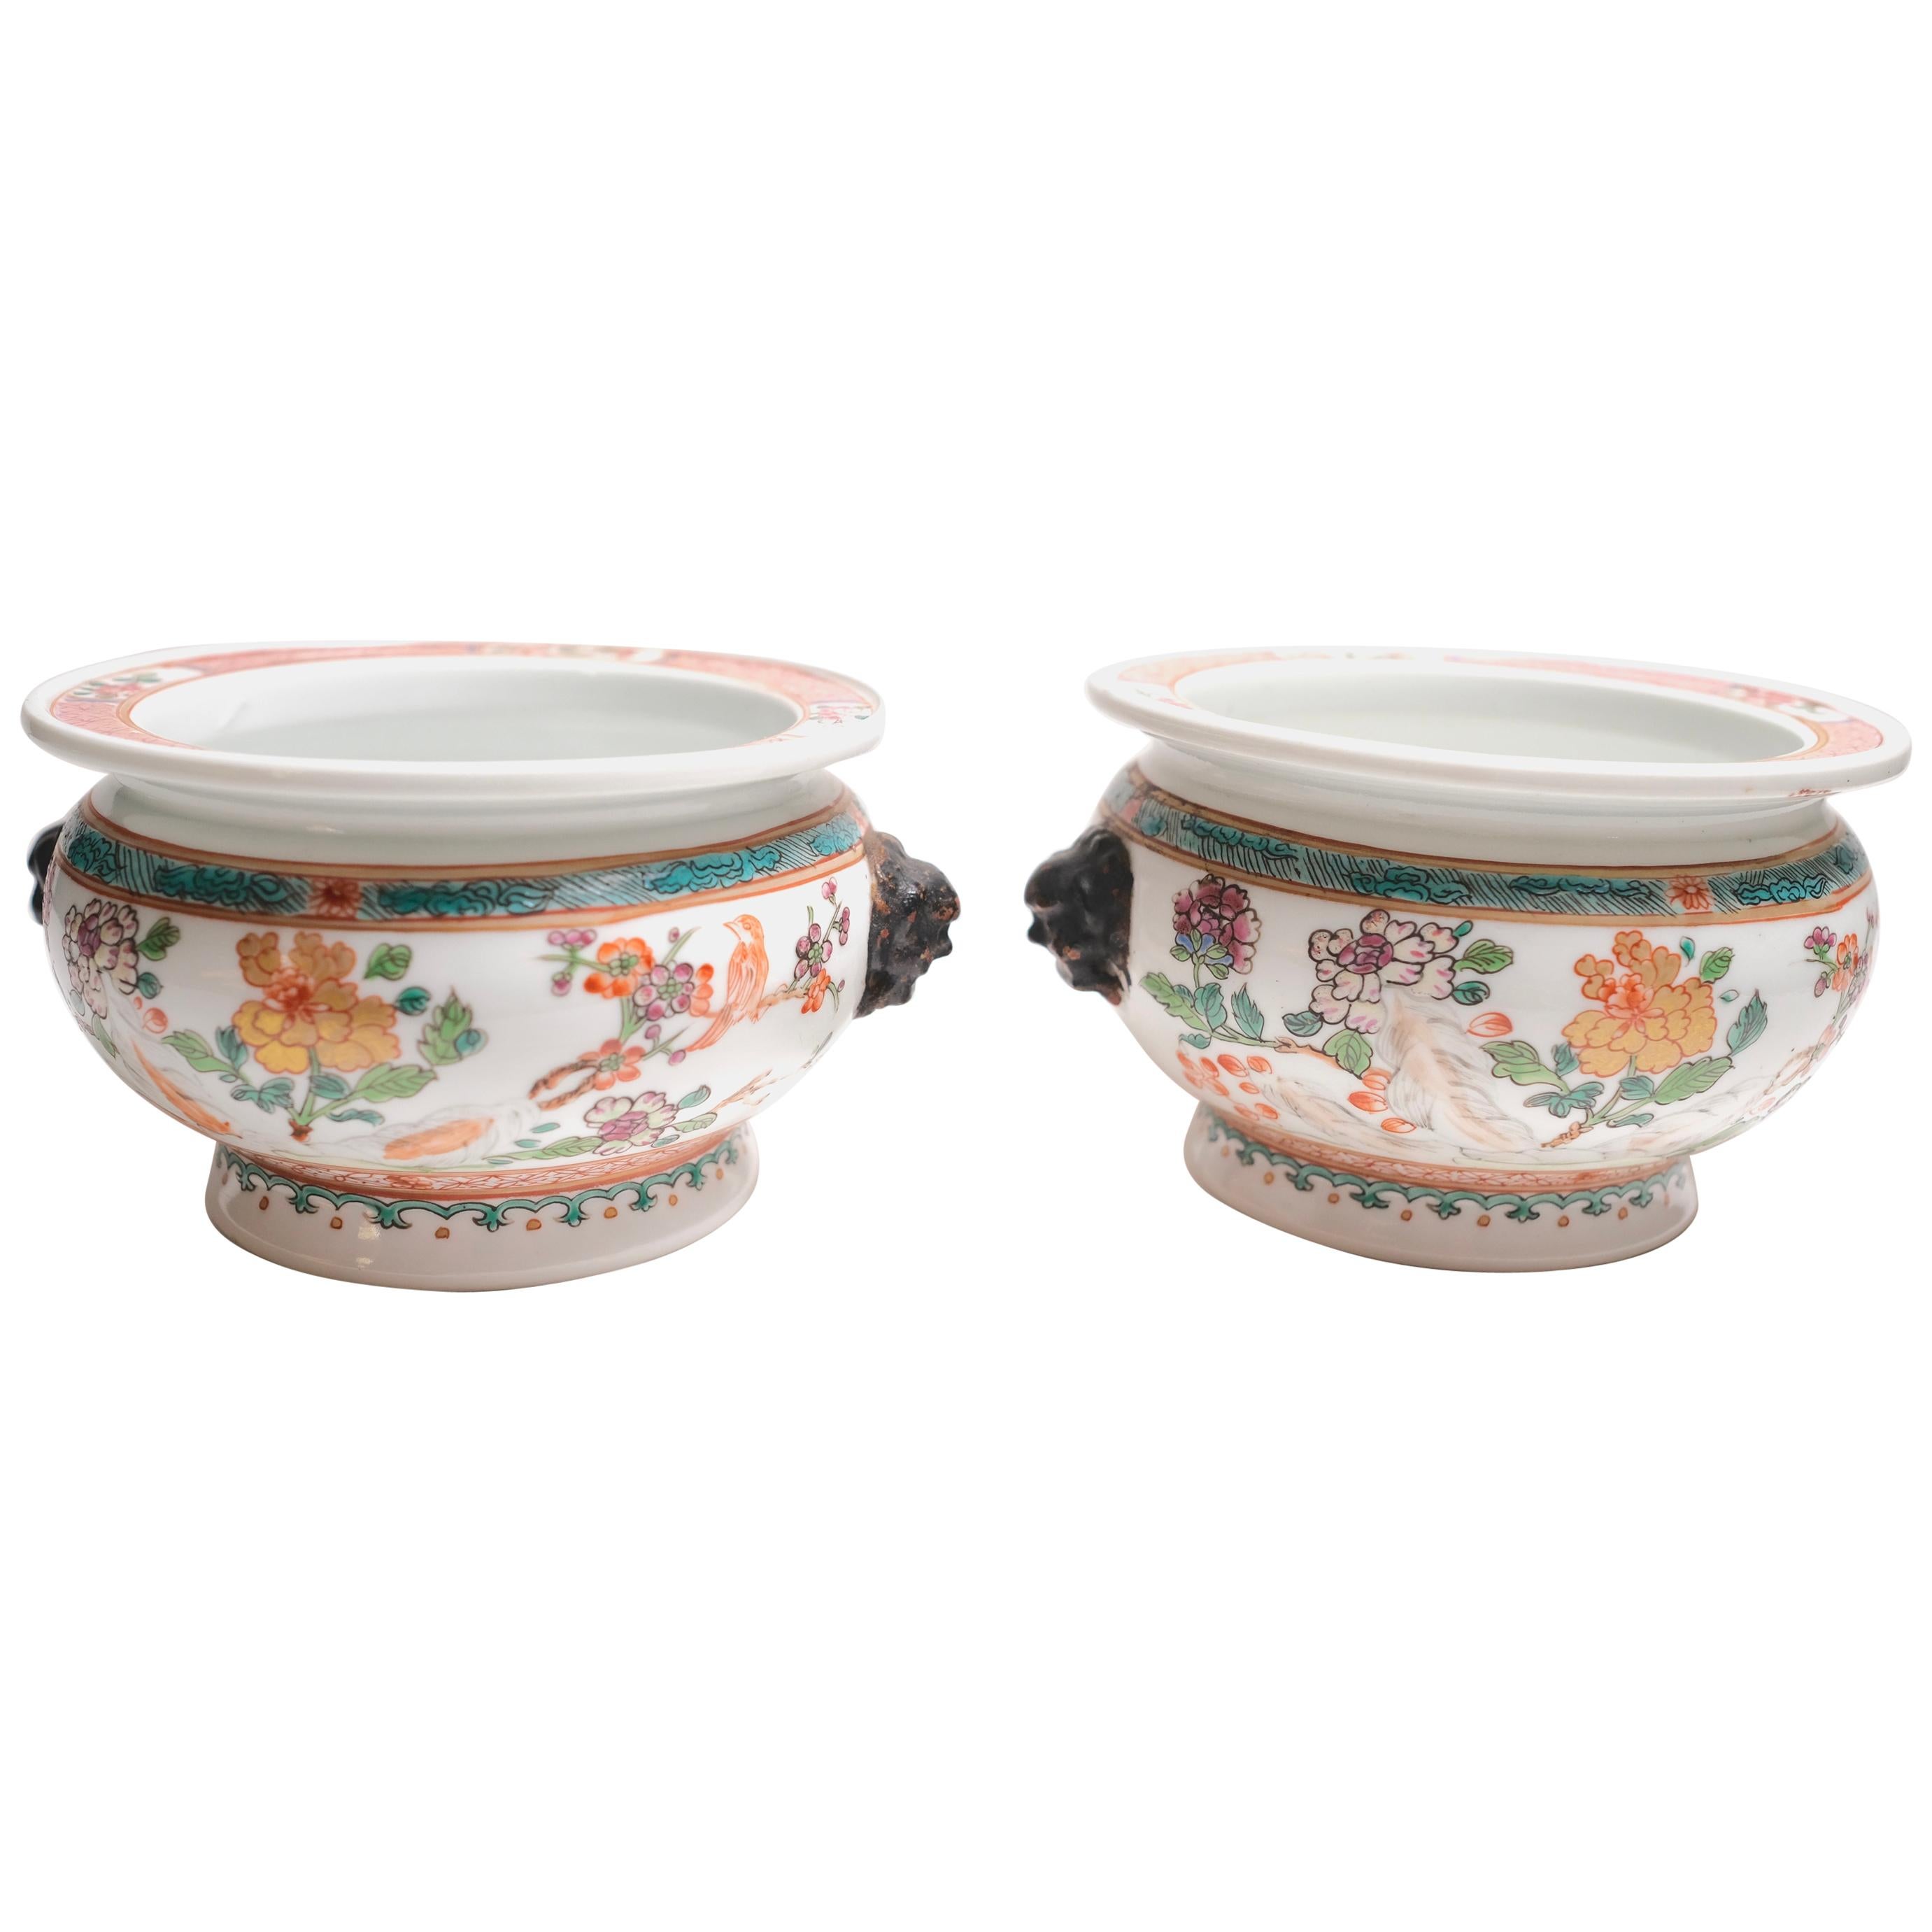 Pair of 19th Century Chinese Export Petite Bowls For Sale